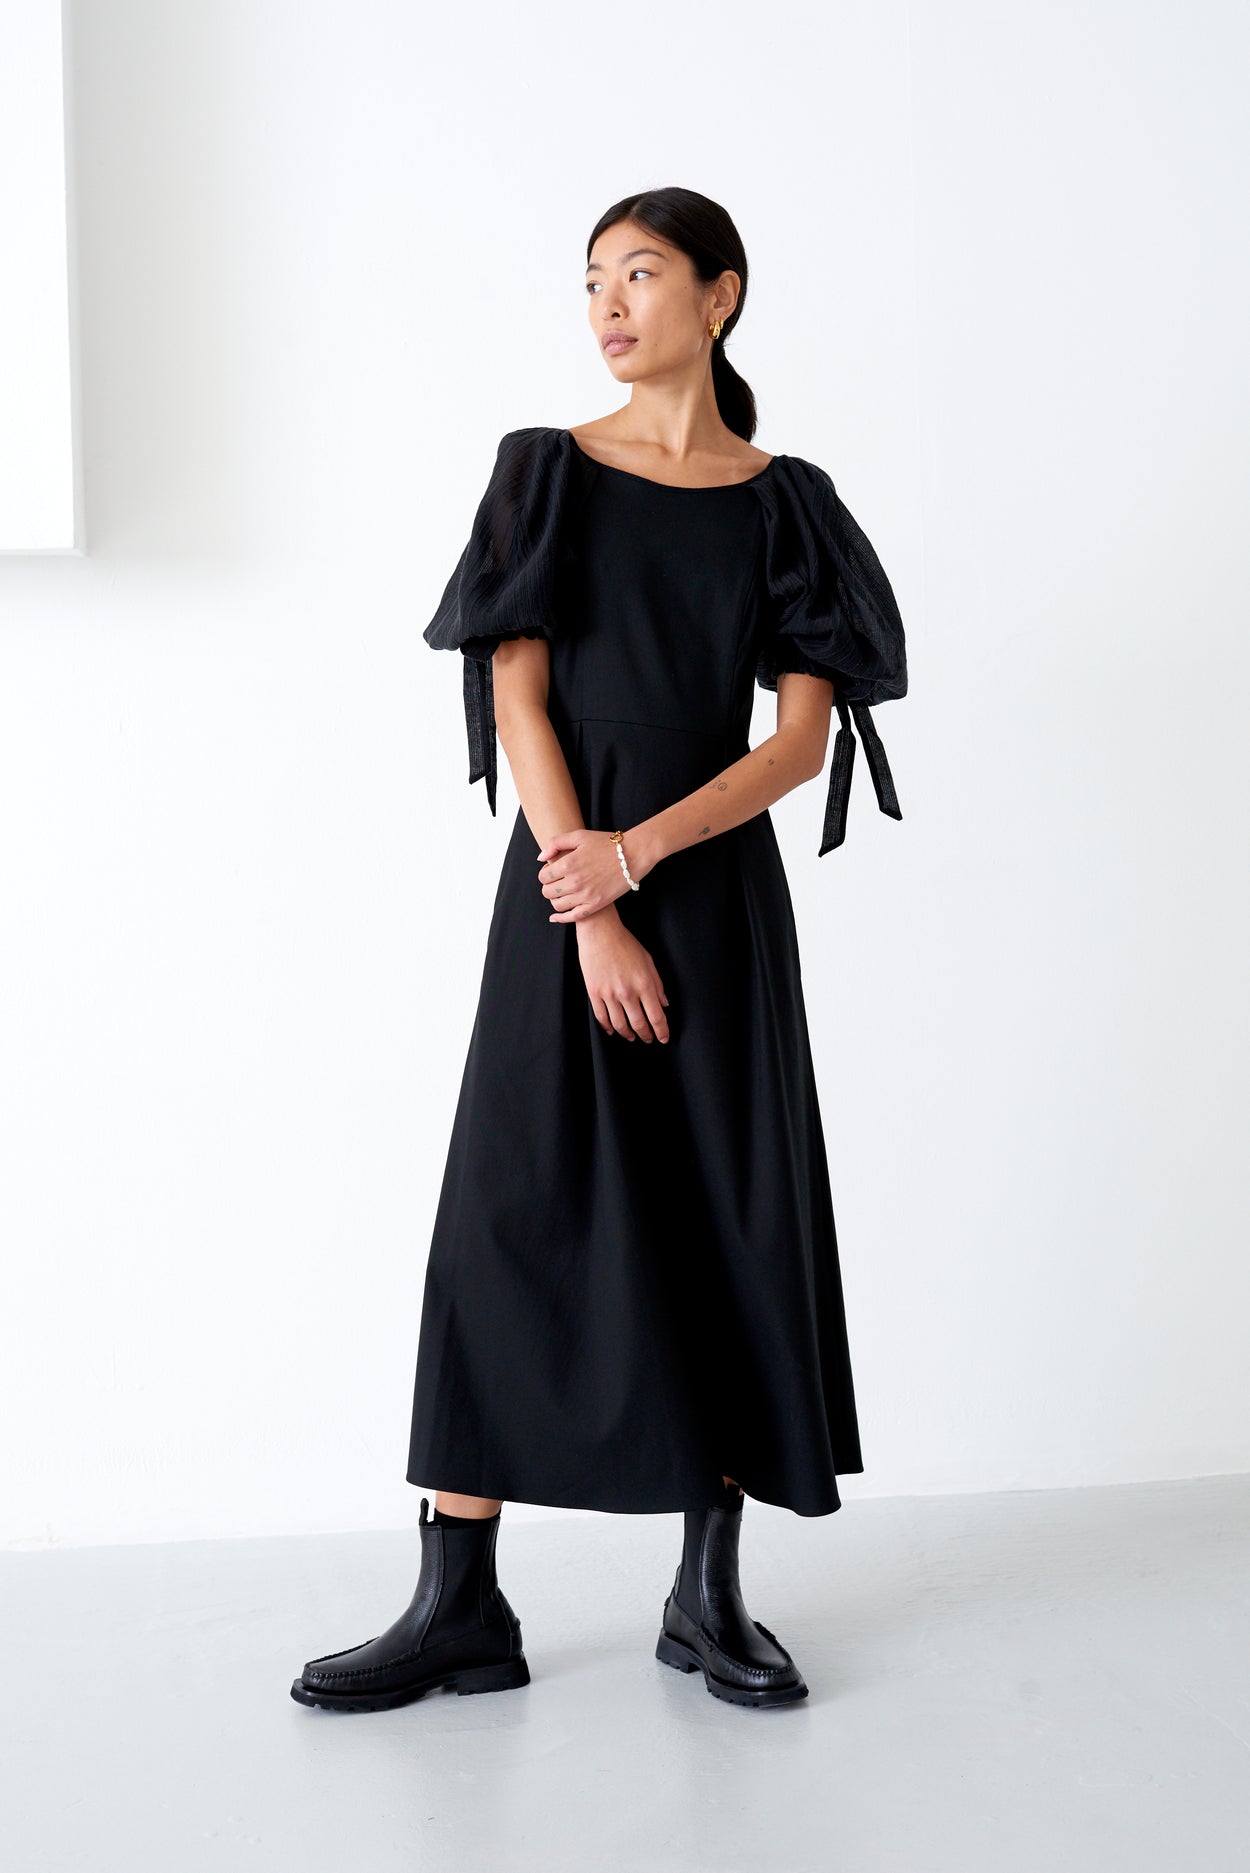 Dresses - Sustainable Luxury Fashion by Mother of Pearl